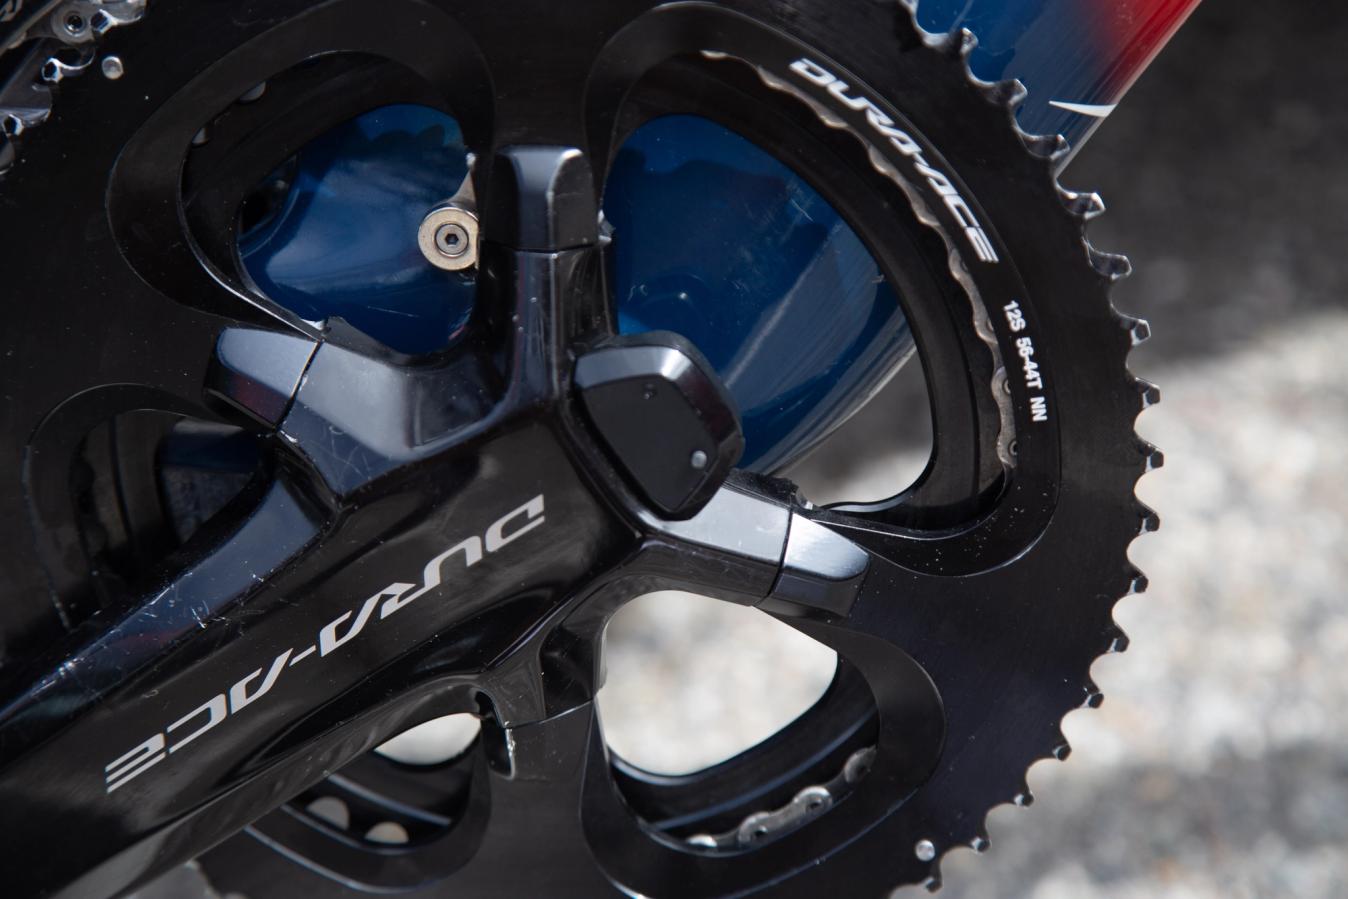 A monster 56/44t chainset